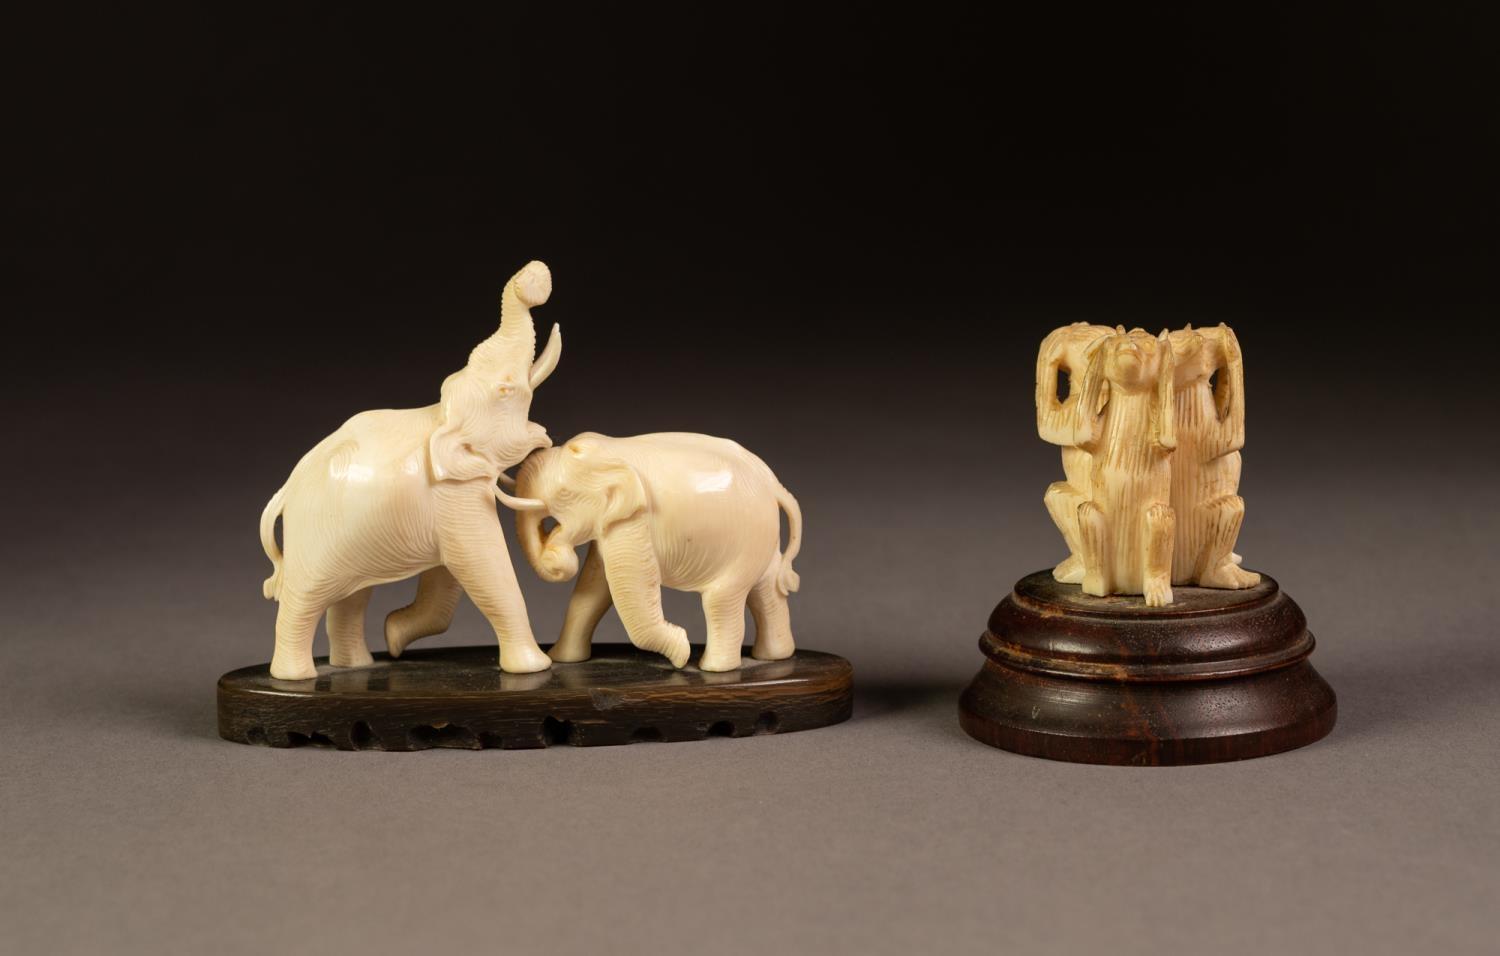 A SMALL CARVED IVORY MODEL OF TWO ELEPHANTS FIGHTING, on an elliptical horn base, 3 3/4" (9.5cm)